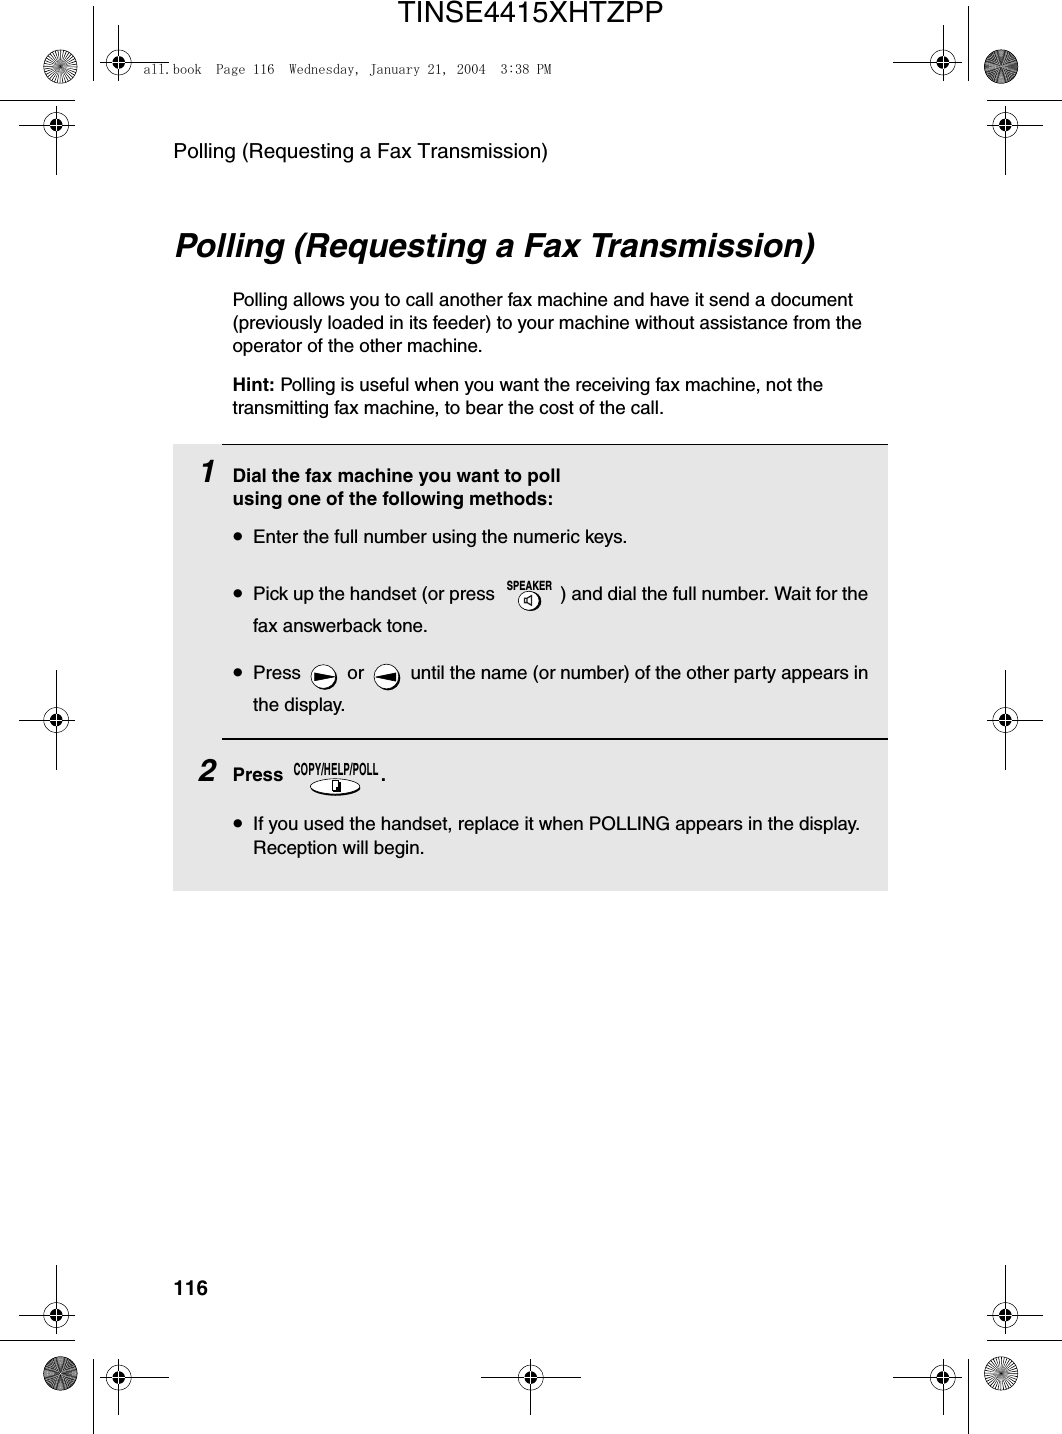 Polling (Requesting a Fax Transmission)116Polling (Requesting a Fax Transmission)Polling allows you to call another fax machine and have it send a document (previously loaded in its feeder) to your machine without assistance from the operator of the other machine. Hint: Polling is useful when you want the receiving fax machine, not the transmitting fax machine, to bear the cost of the call.1Dial the fax machine you want to poll using one of the following methods:•Enter the full number using the numeric keys.•Pick up the handset (or press  ) and dial the full number. Wait for the fax answerback tone.•Press   or   until the name (or number) of the other party appears in the display.2Press . •If you used the handset, replace it when POLLING appears in the display. Reception will begin.SPEAKERCOPY/HELP/POLLall.book  Page 116  Wednesday, January 21, 2004  3:38 PMTINSE4415XHTZPP